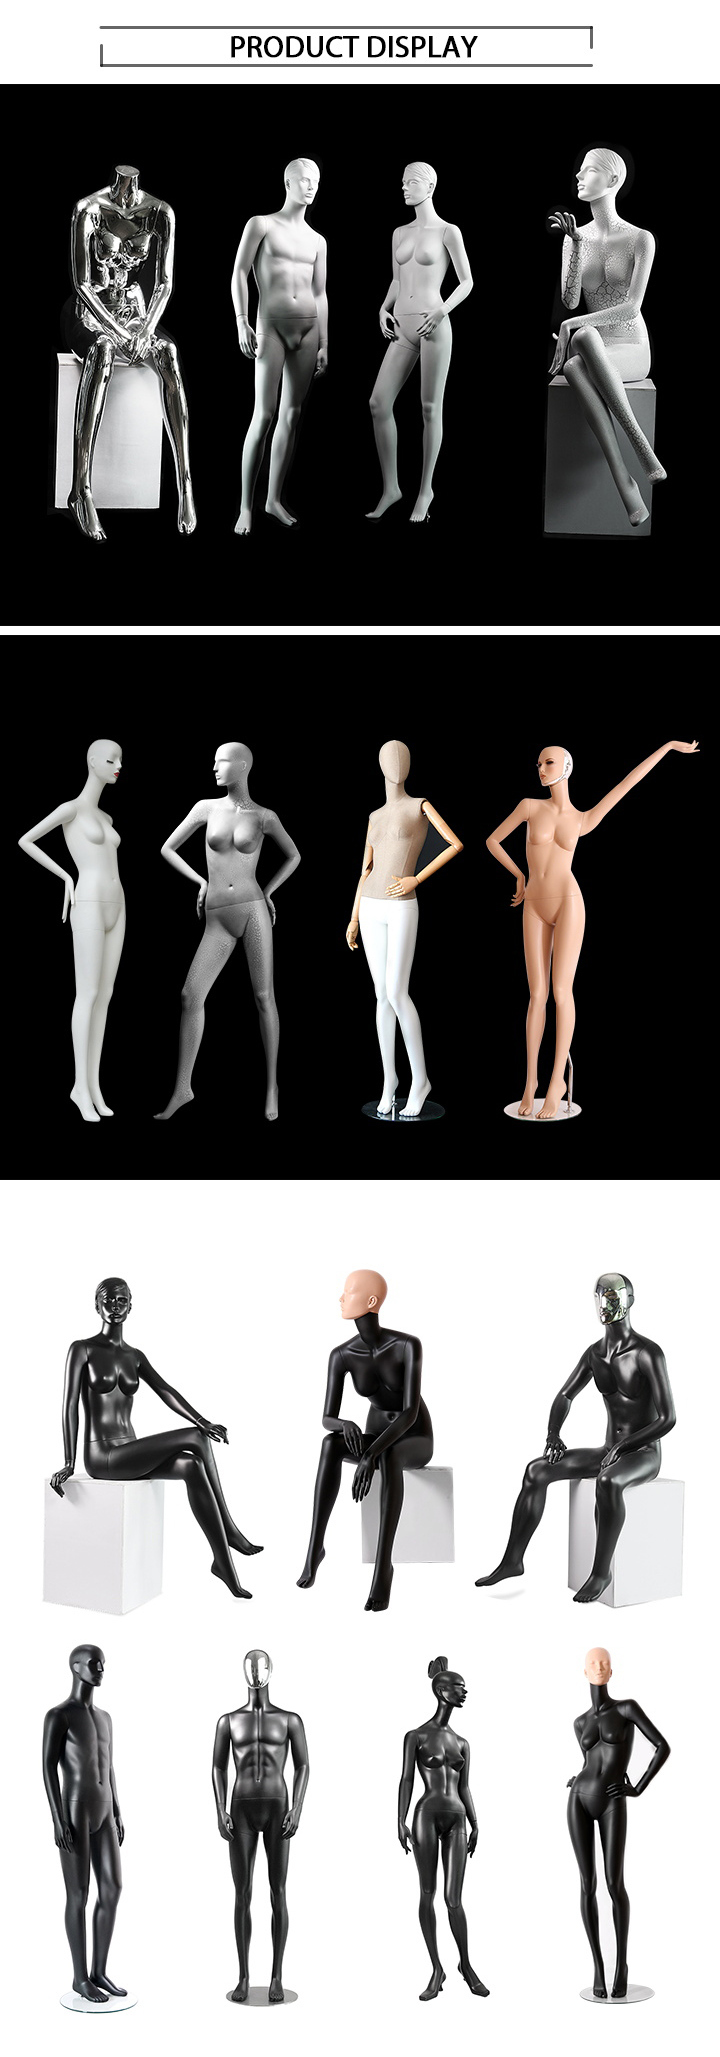 183cm Height Fashion Full Body Male Mannequin Display Models